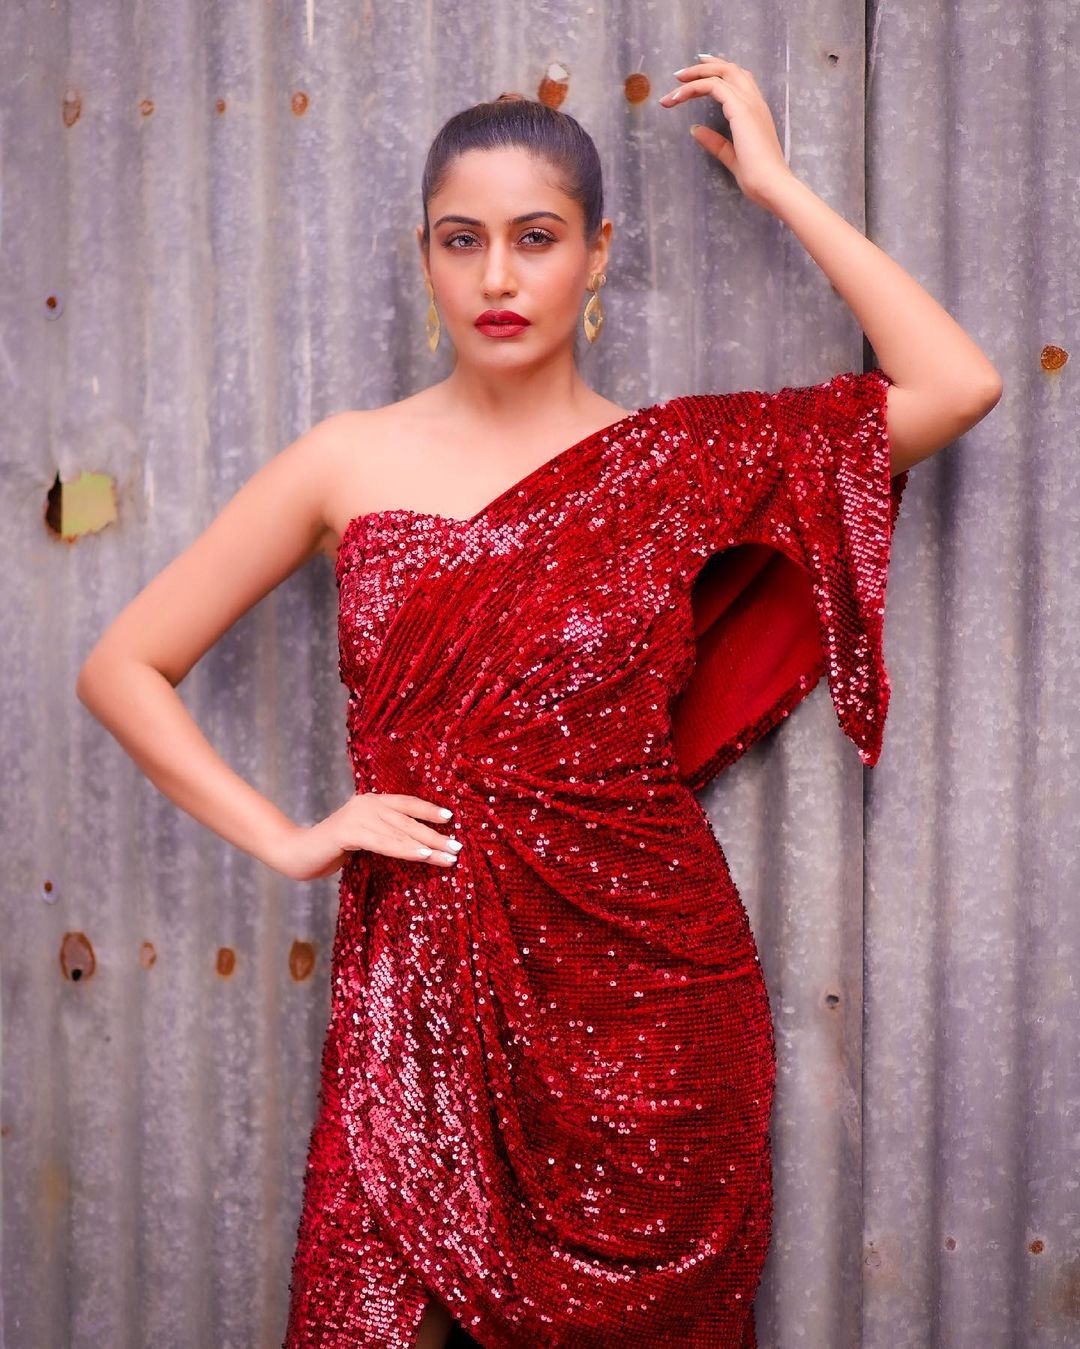  Surbhi Chandna looks super glamorous in the sequinned red dress. (Image: Instagram)